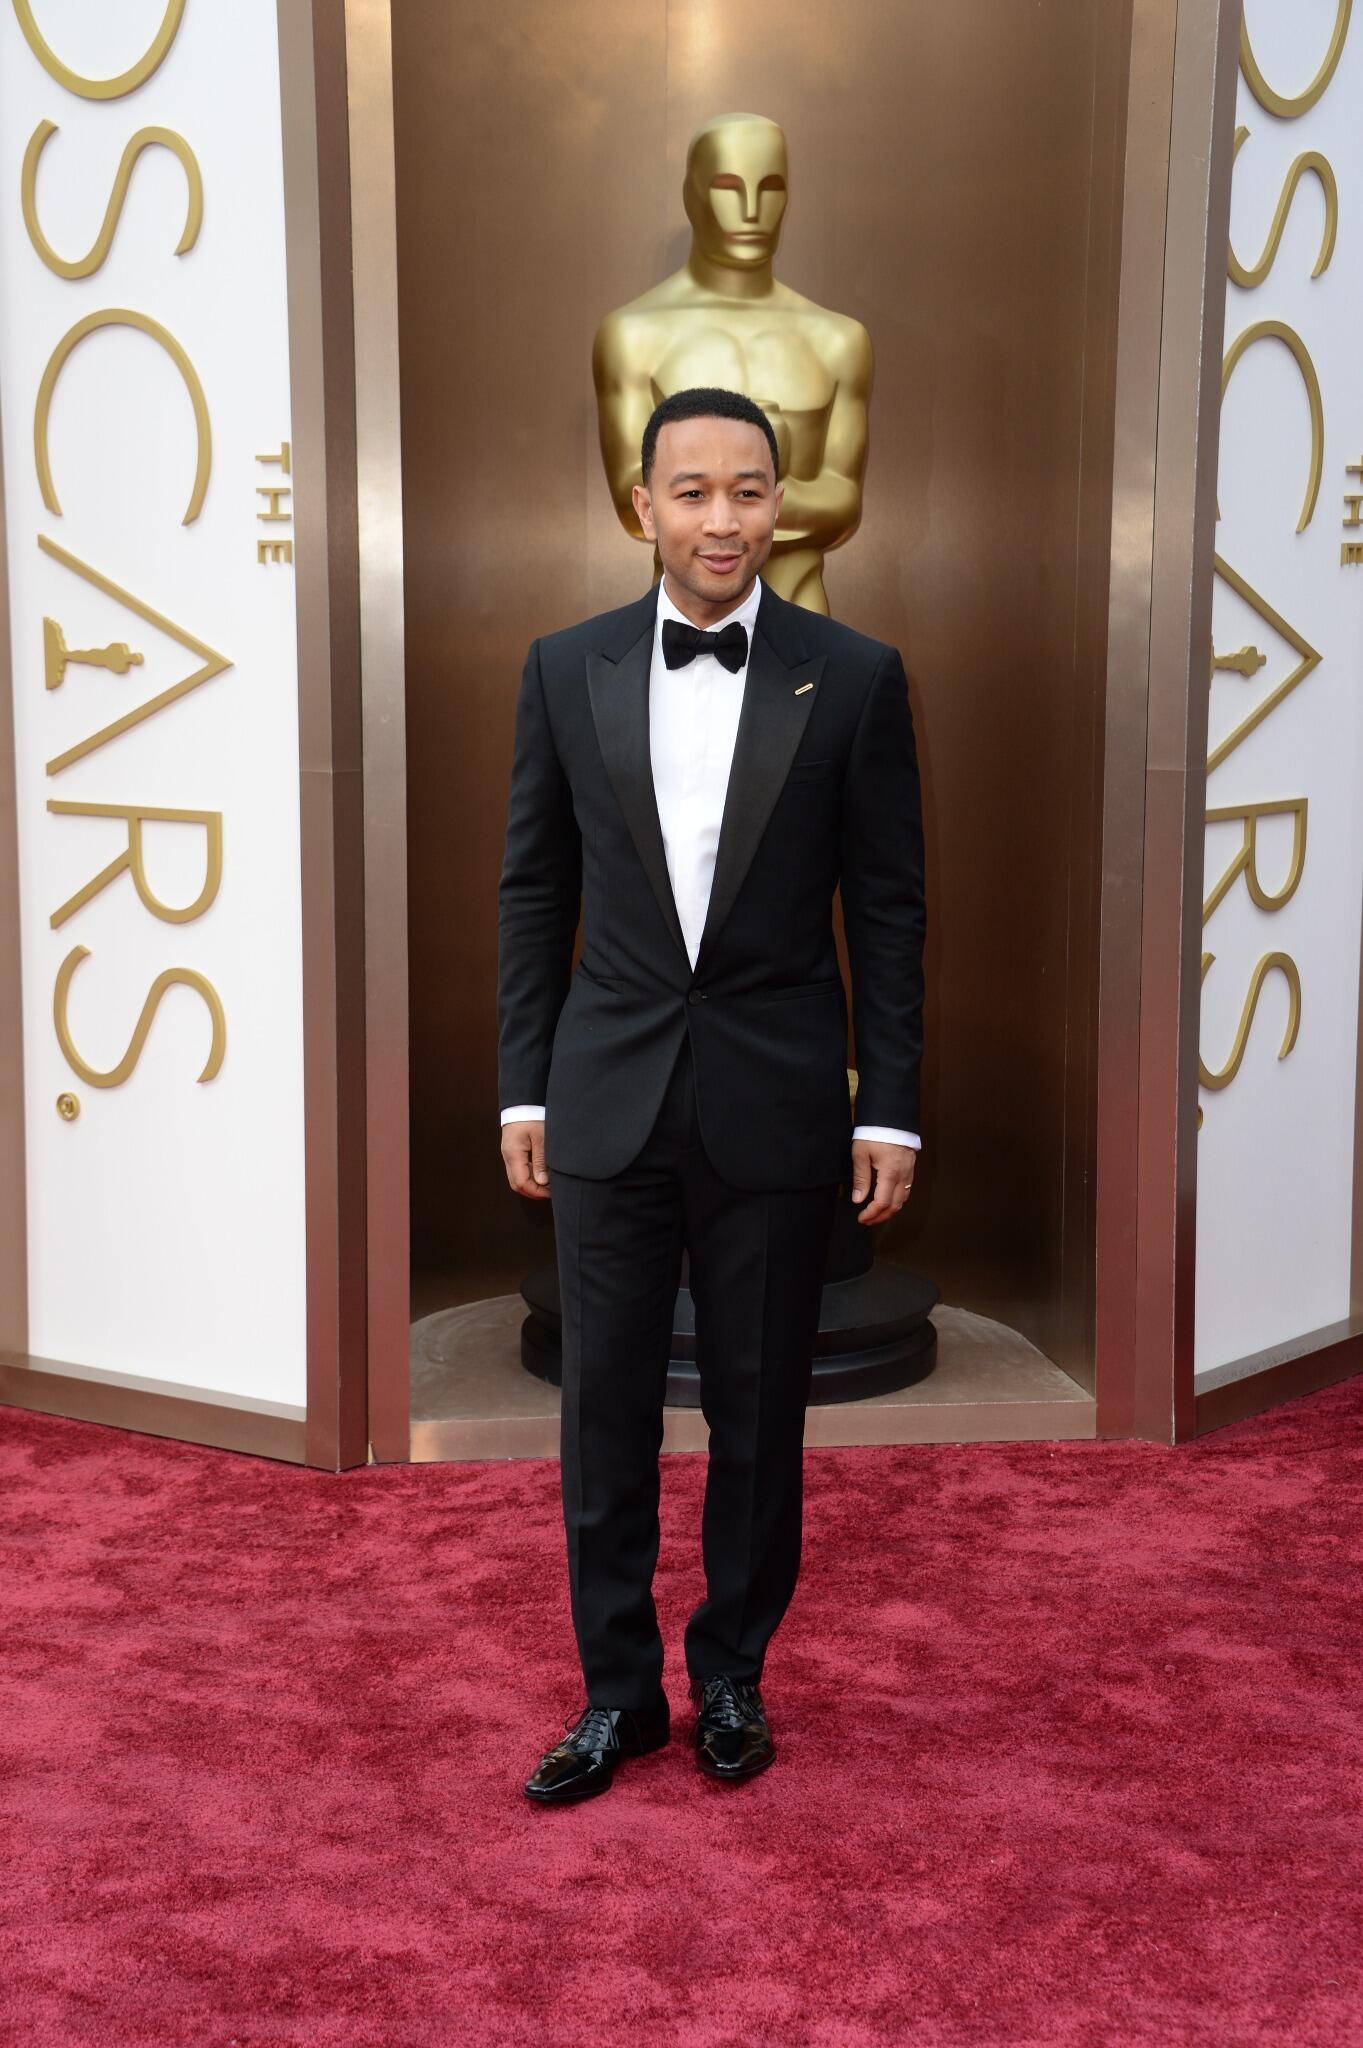 molester procent gallon VERSACE on Twitter: "John Legend looking handsome in a Versace tuxedo on  the Oscars red carpet http://t.co/JXymkdjyvL" / Twitter